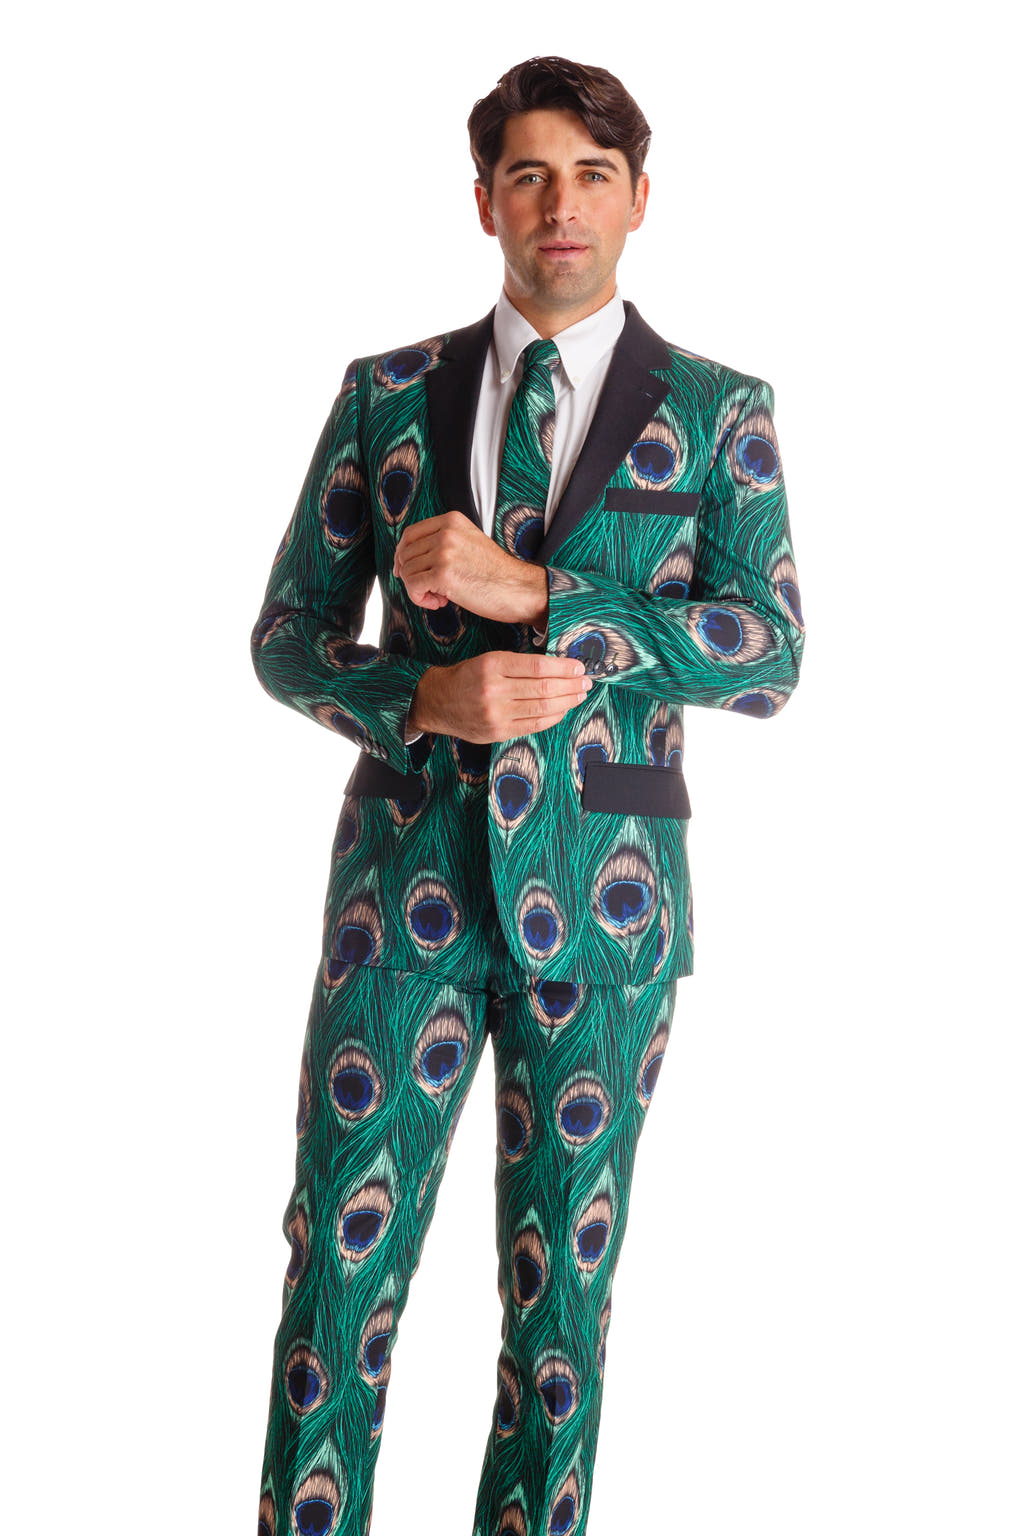 New Years Eve Peacock Suit | The Peacock Player